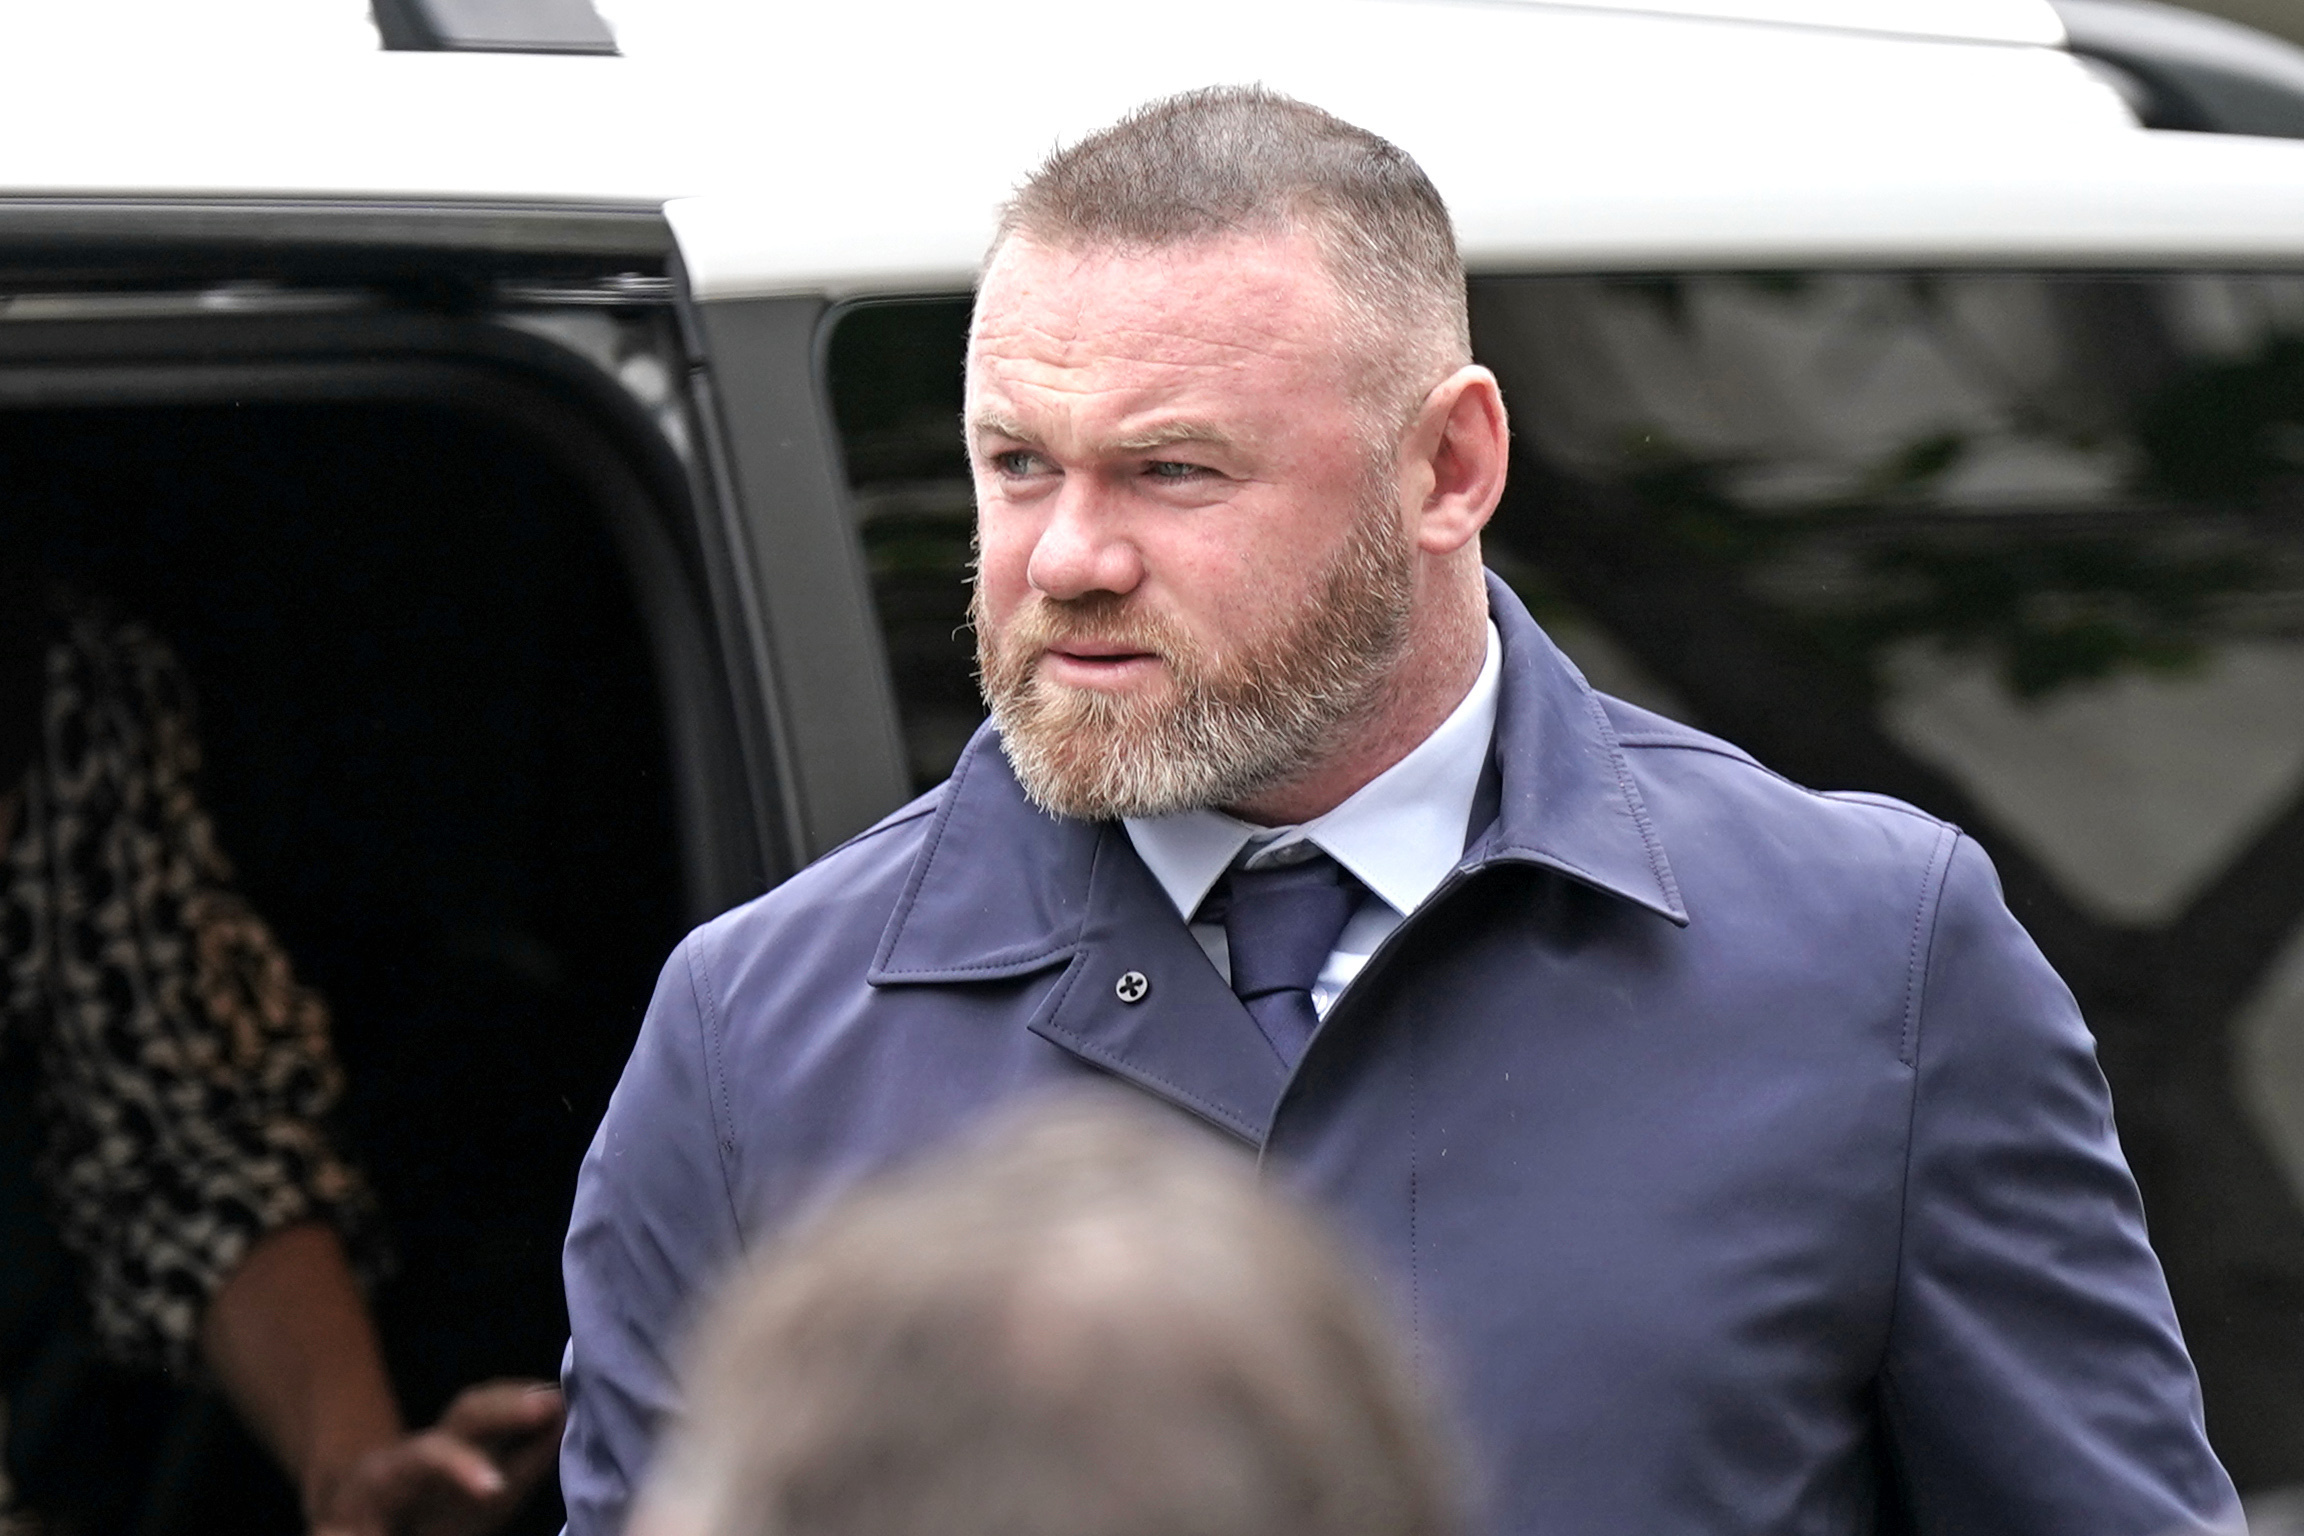 Wayne Rooney arrives at the Royal Courts Of Justice, London, as the high-profile libel battle between Rebekah Vardy and his wife Coleen Rooney enters its second day. Picture date: Wednesday May 11, 2022. PA Photo. Rooney accused Vardy of leaking false